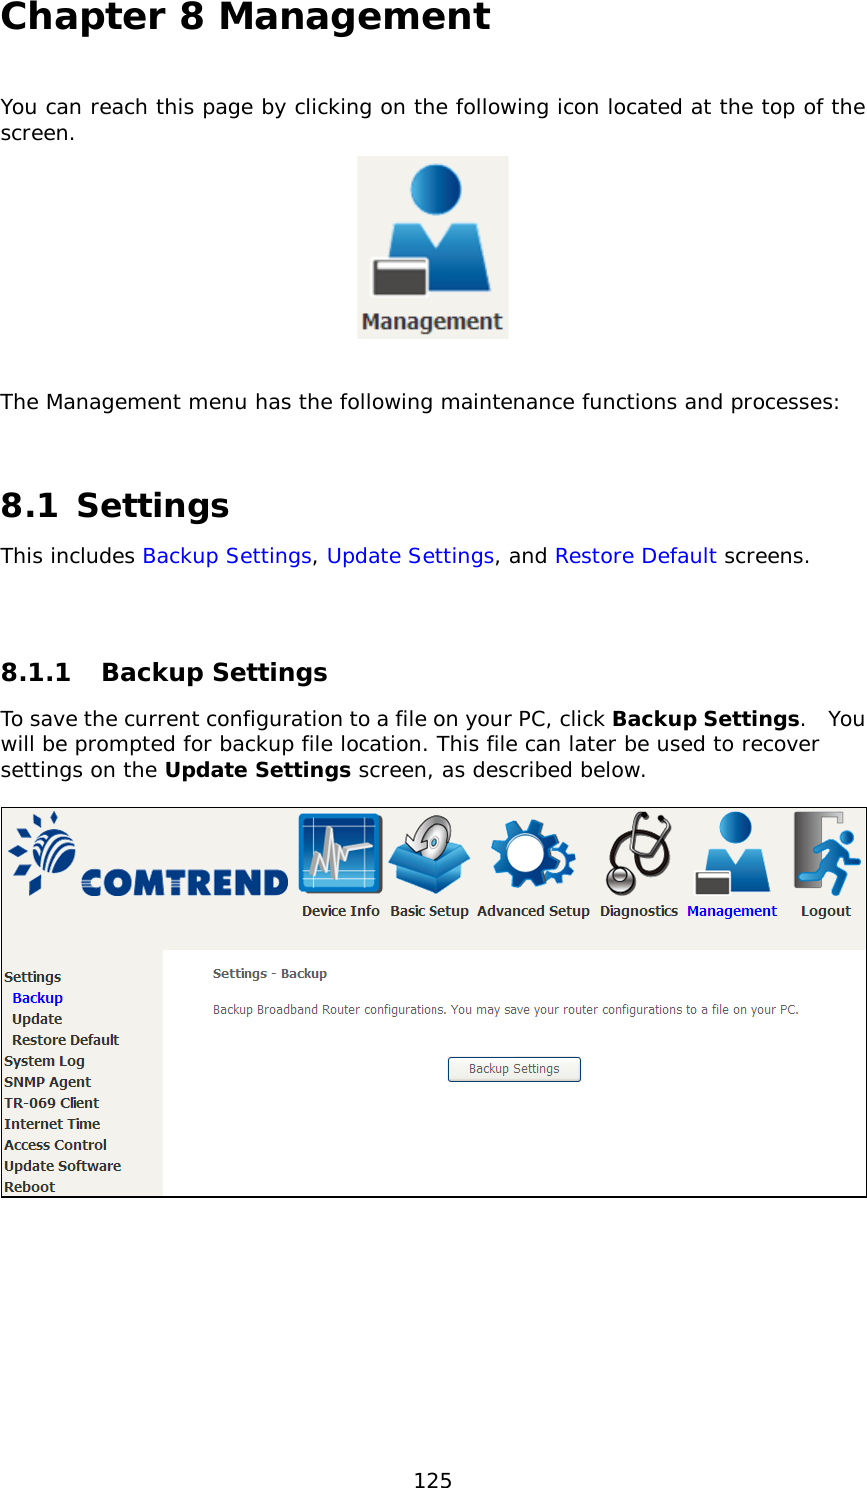  125 Chapter 8 Management You can reach this page by clicking on the following icon located at the top of the screen.    The Management menu has the following maintenance functions and processes:   8.1 Settings This includes Backup Settings, Update Settings, and Restore Default screens.   8.1.1 Backup Settings  To save the current configuration to a file on your PC, click Backup Settings.  You will be prompted for backup file location. This file can later be used to recover settings on the Update Settings screen, as described below.    